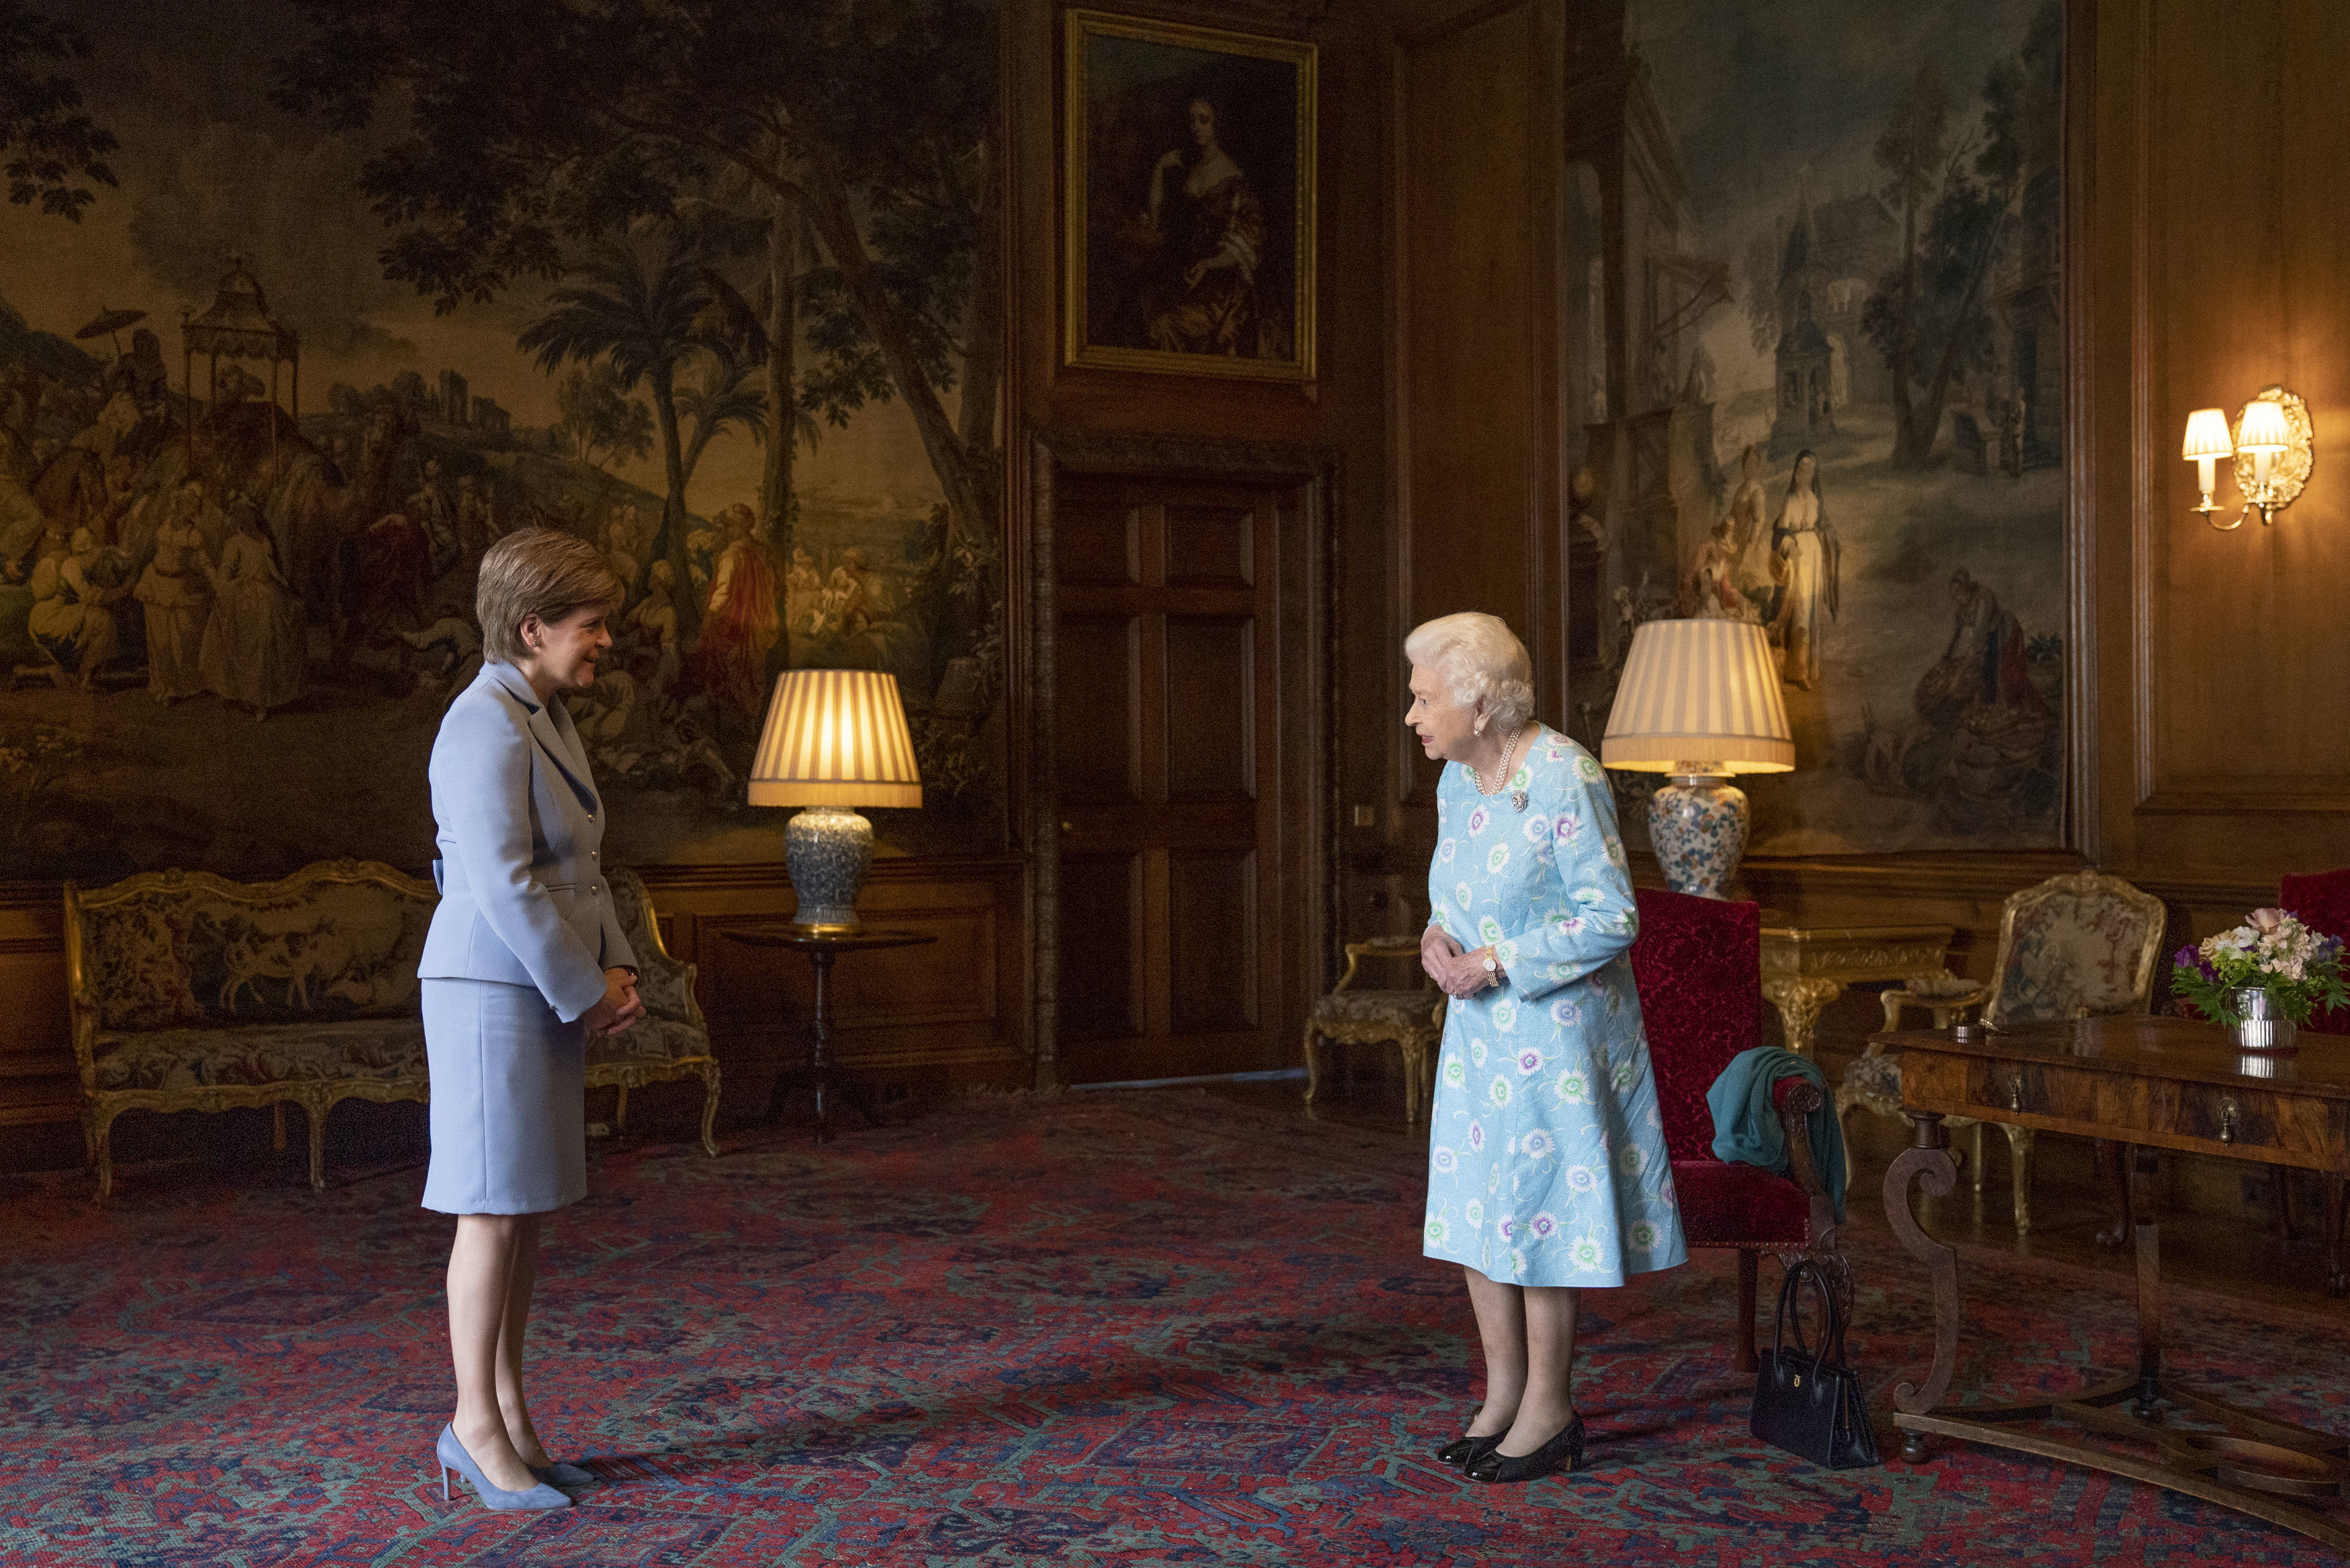 <p>Queen Elizabeth II received First Minister of Scotland Nicola Sturgeon during an audience at the Palace of Holyroodhouse in Edinburgh on June 29, 2021. </p>